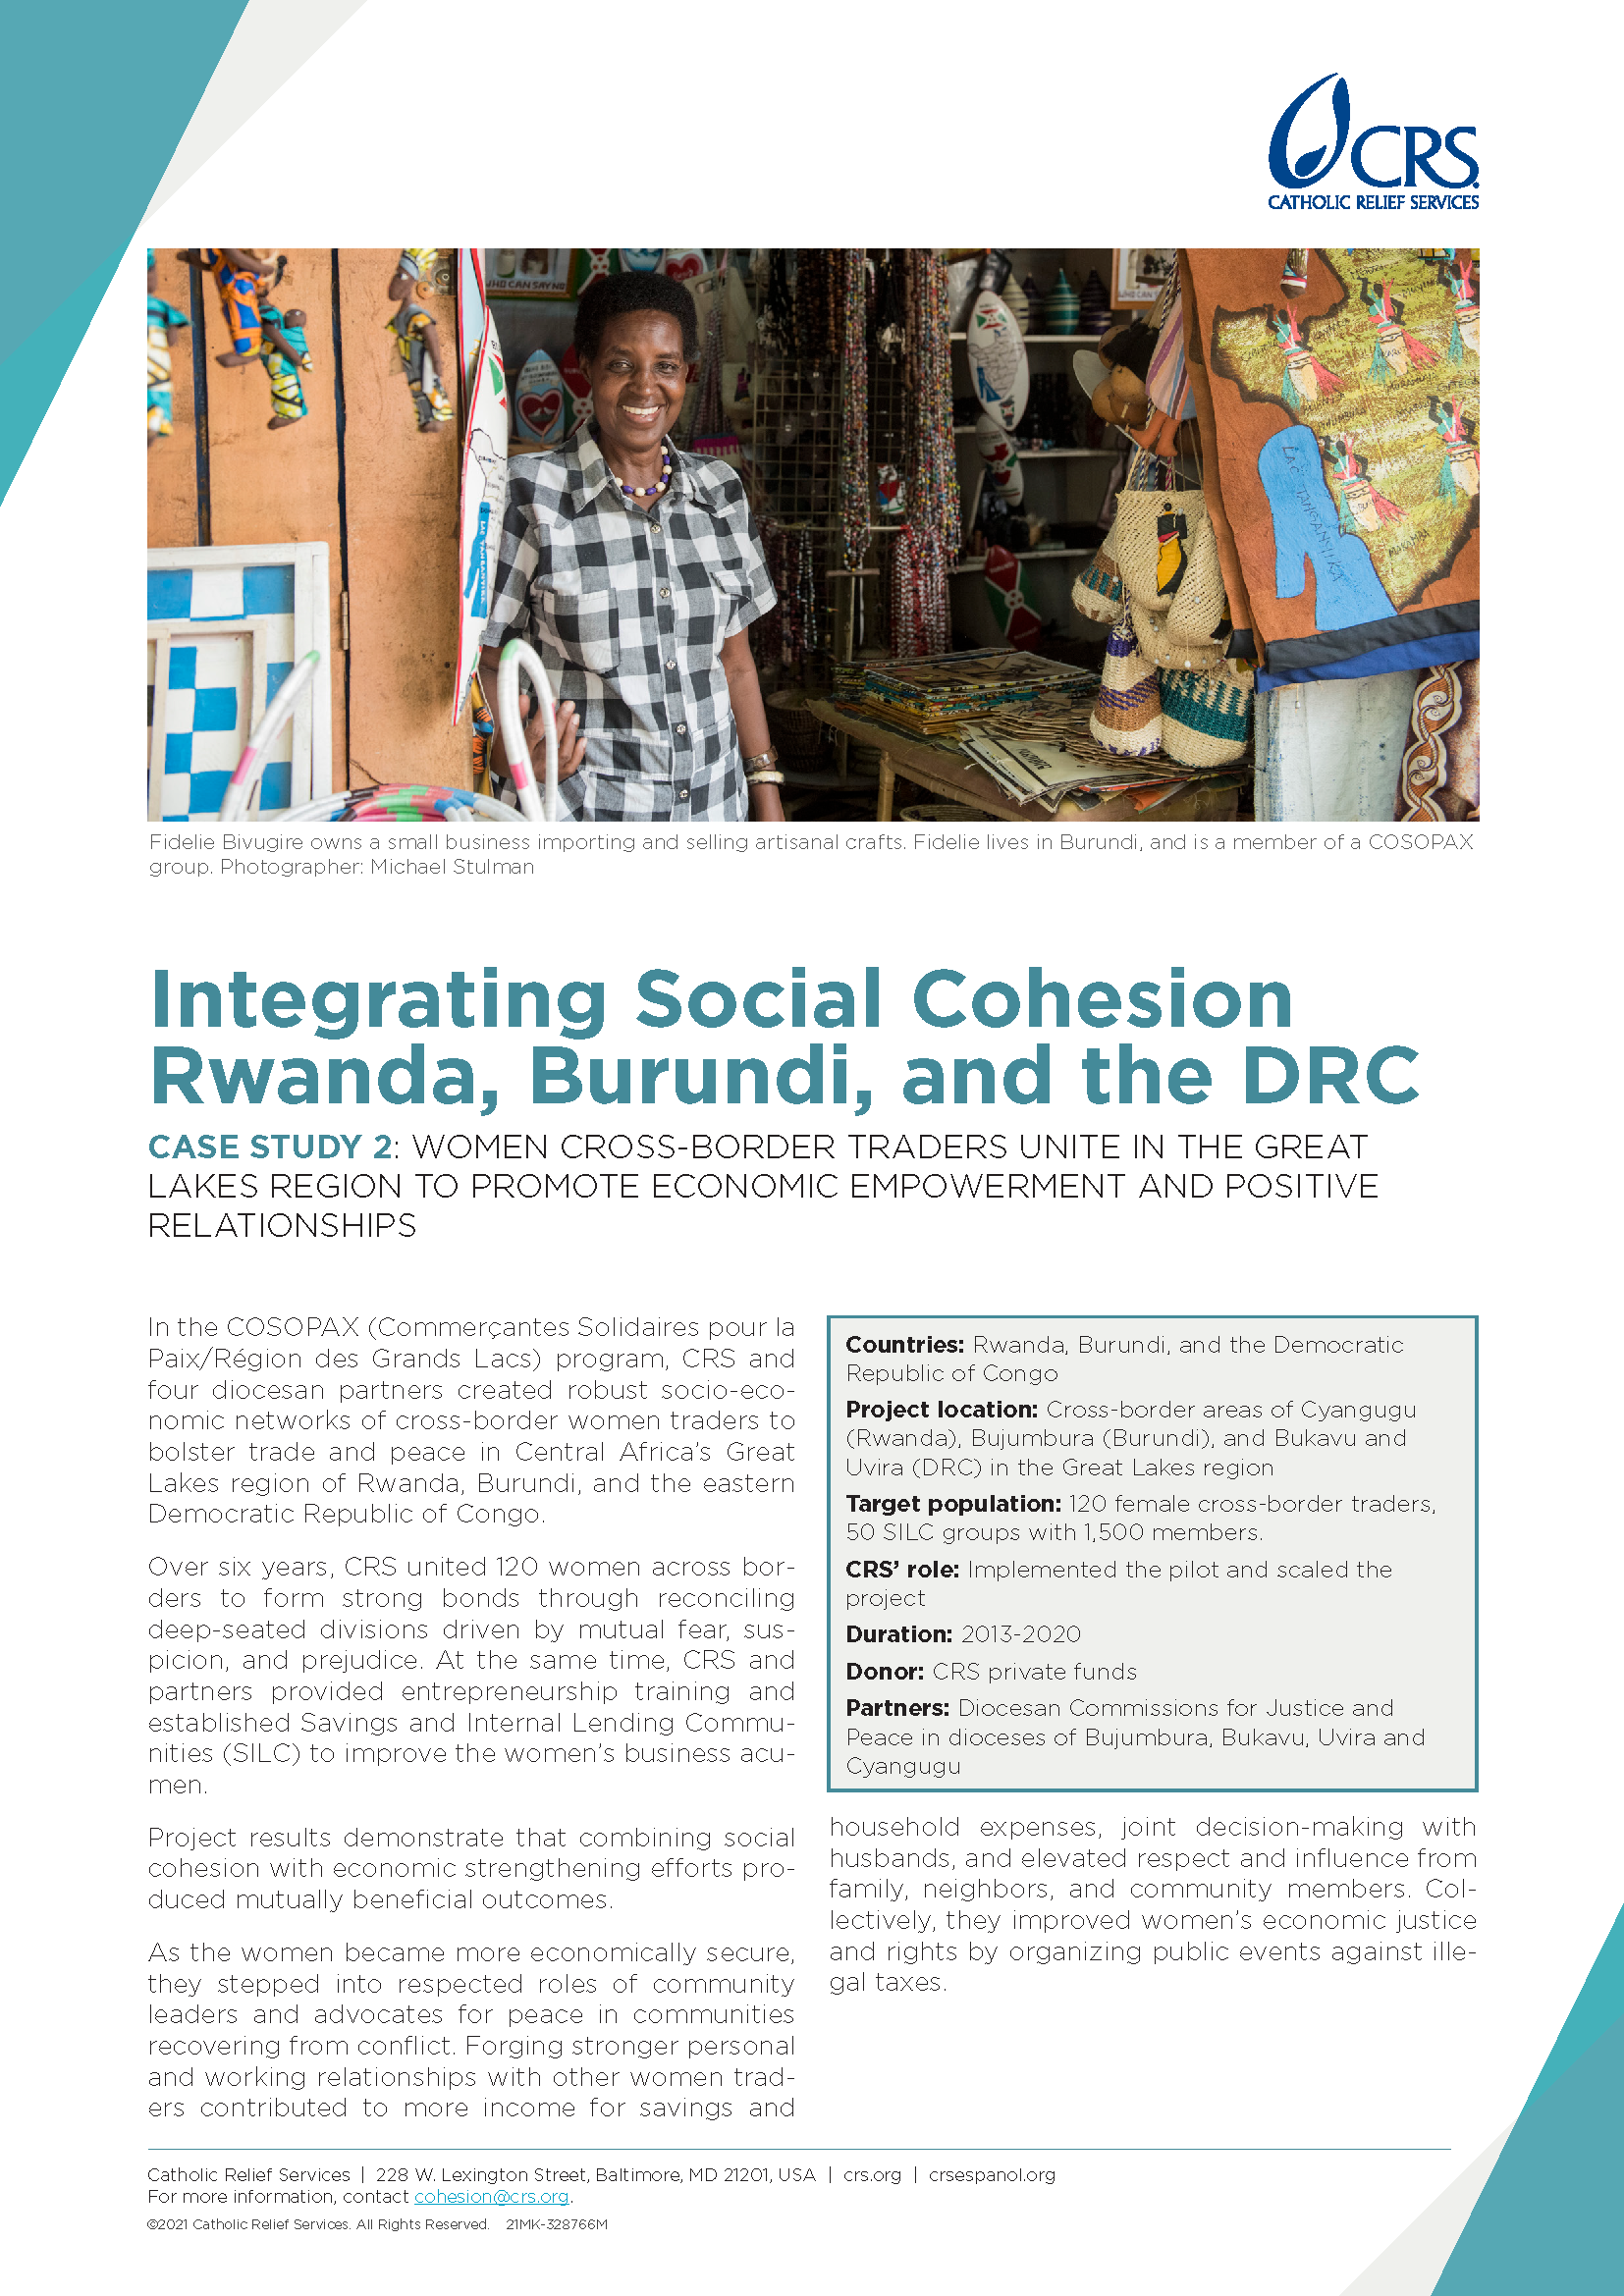 Cover page for Enhancing Outcomes by Integrating Social Cohesion & Justice